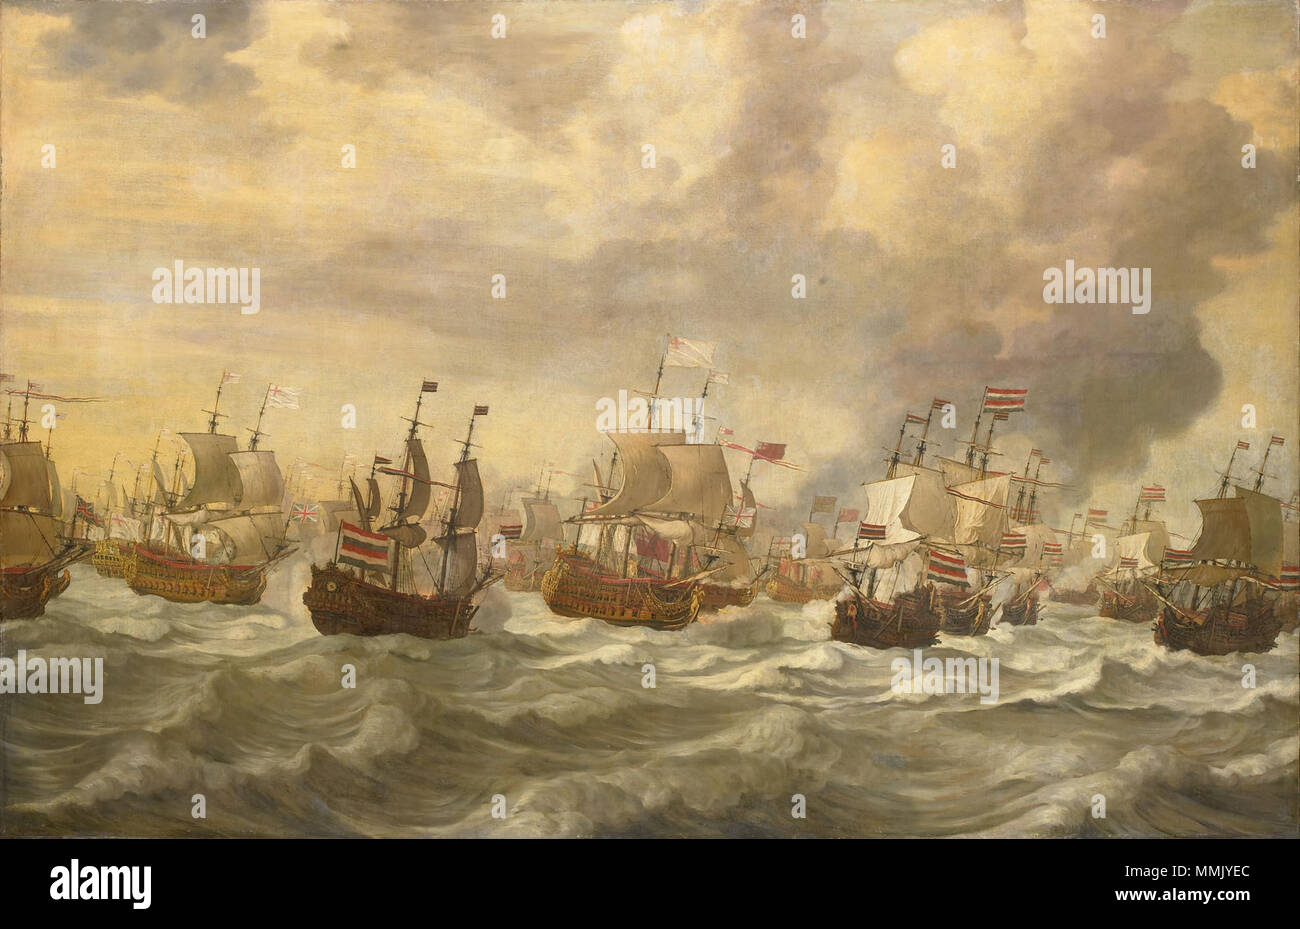 Episode from the Four Day Battle at Sea, 11-14 June 1666, in the second Anglo-Dutch War (1665-67).. between 1666 and 1693. Four Day Battle - Episode uit de vierdaagse zeeslag (Willem van de Velde I, 1693) Stock Photo